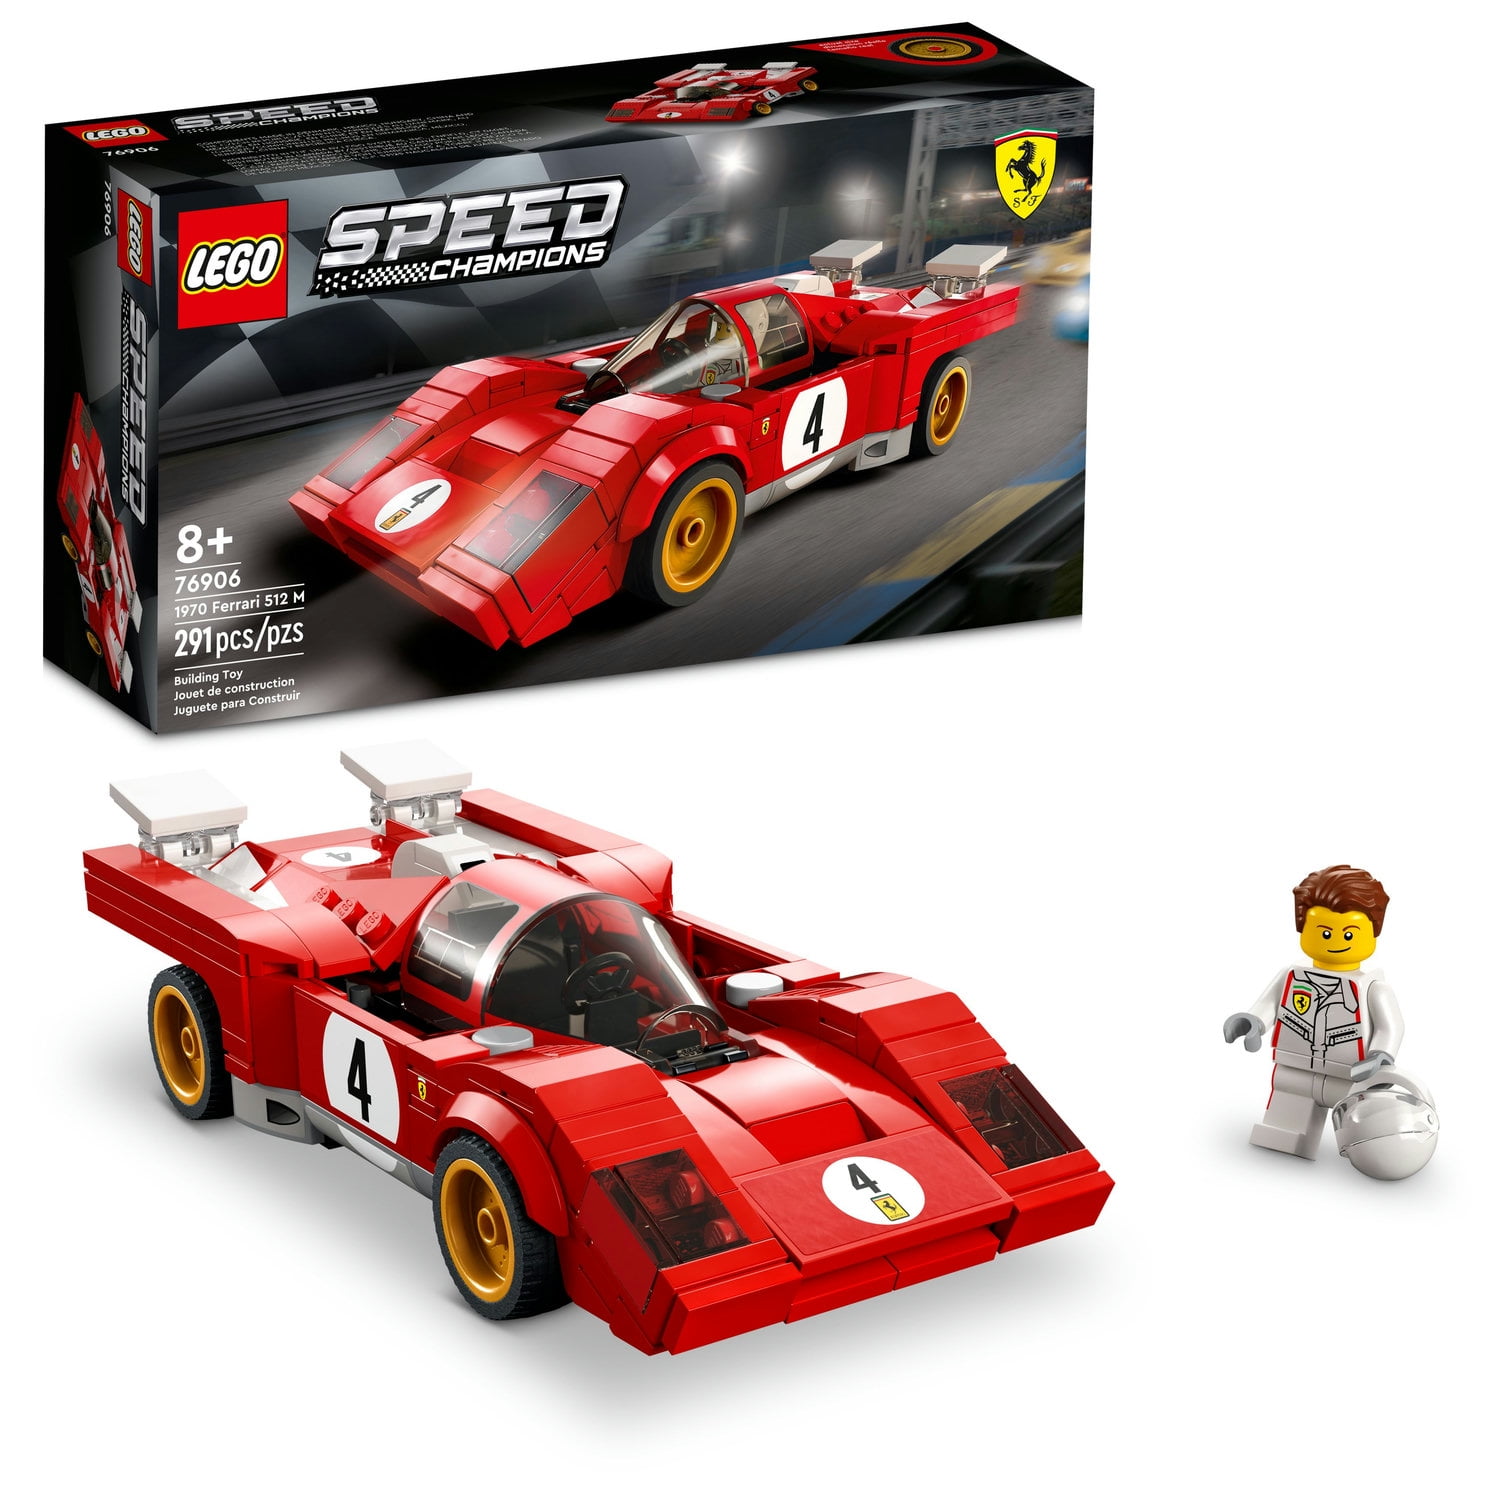 LEGO-MINIFIGURES SERIES 1,2 3 X 1 HEAD FOR THE RACE CAR DRIVER  SERIES 3  PARTS